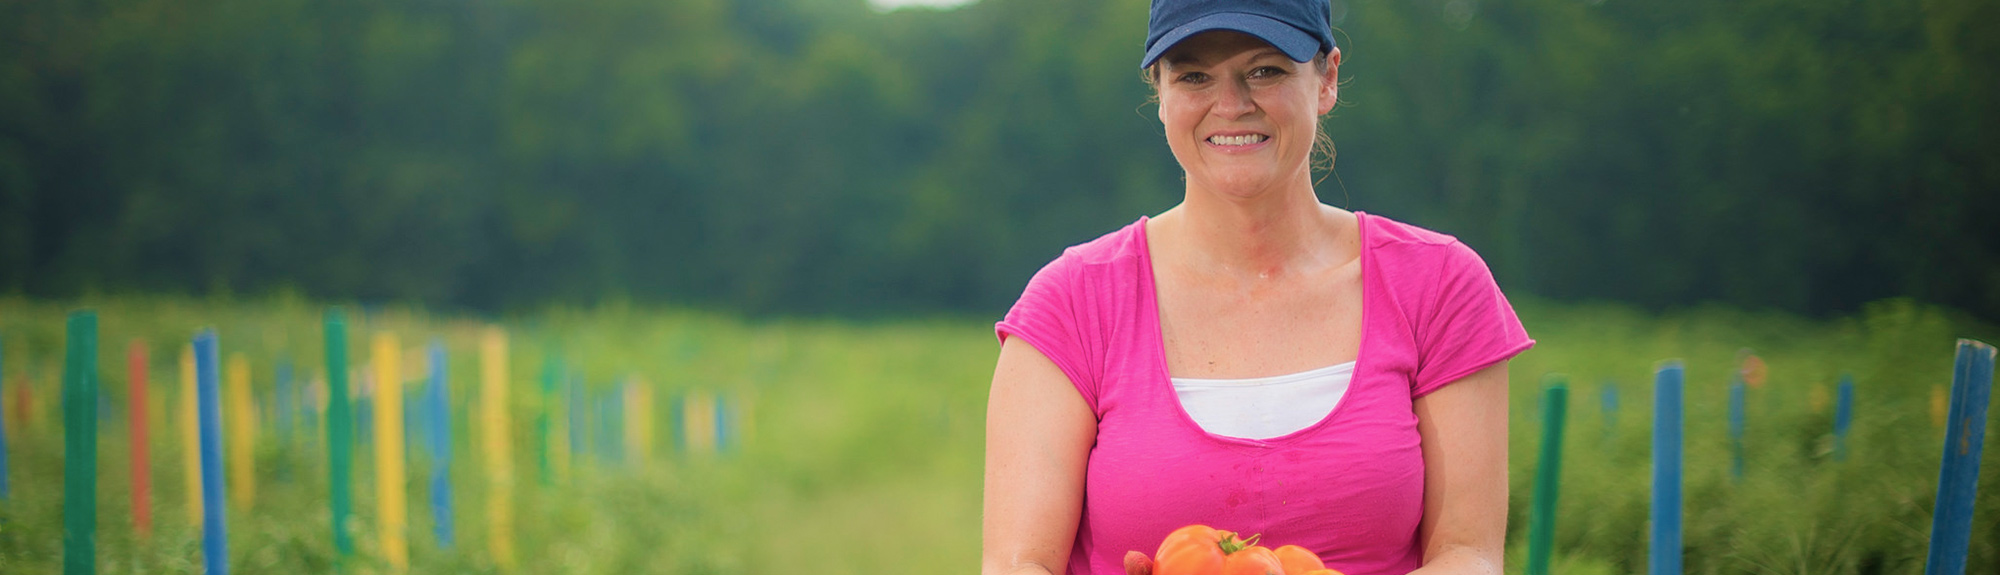 USDA RMA's Stefanie Pidgeon picking tomatoes and squash at Miller Farms in Clinton, Md., July 28, 2017 in support of the 2017 Feds Feed Families campaign. USDA photo by Preston Keres